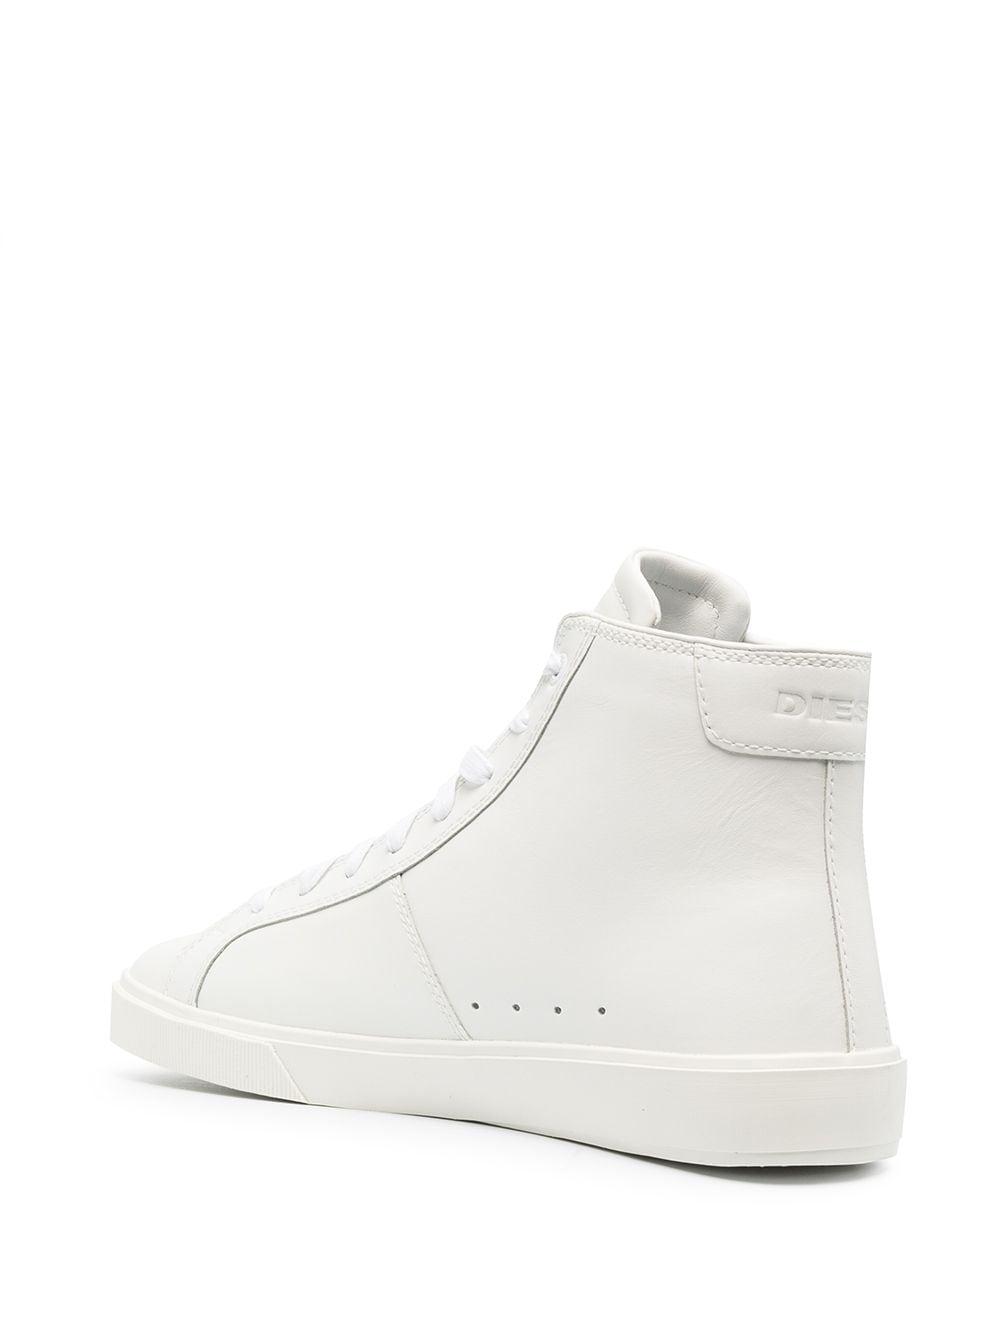 DIESEL Leather High-top Sneakers in White for Men - Lyst